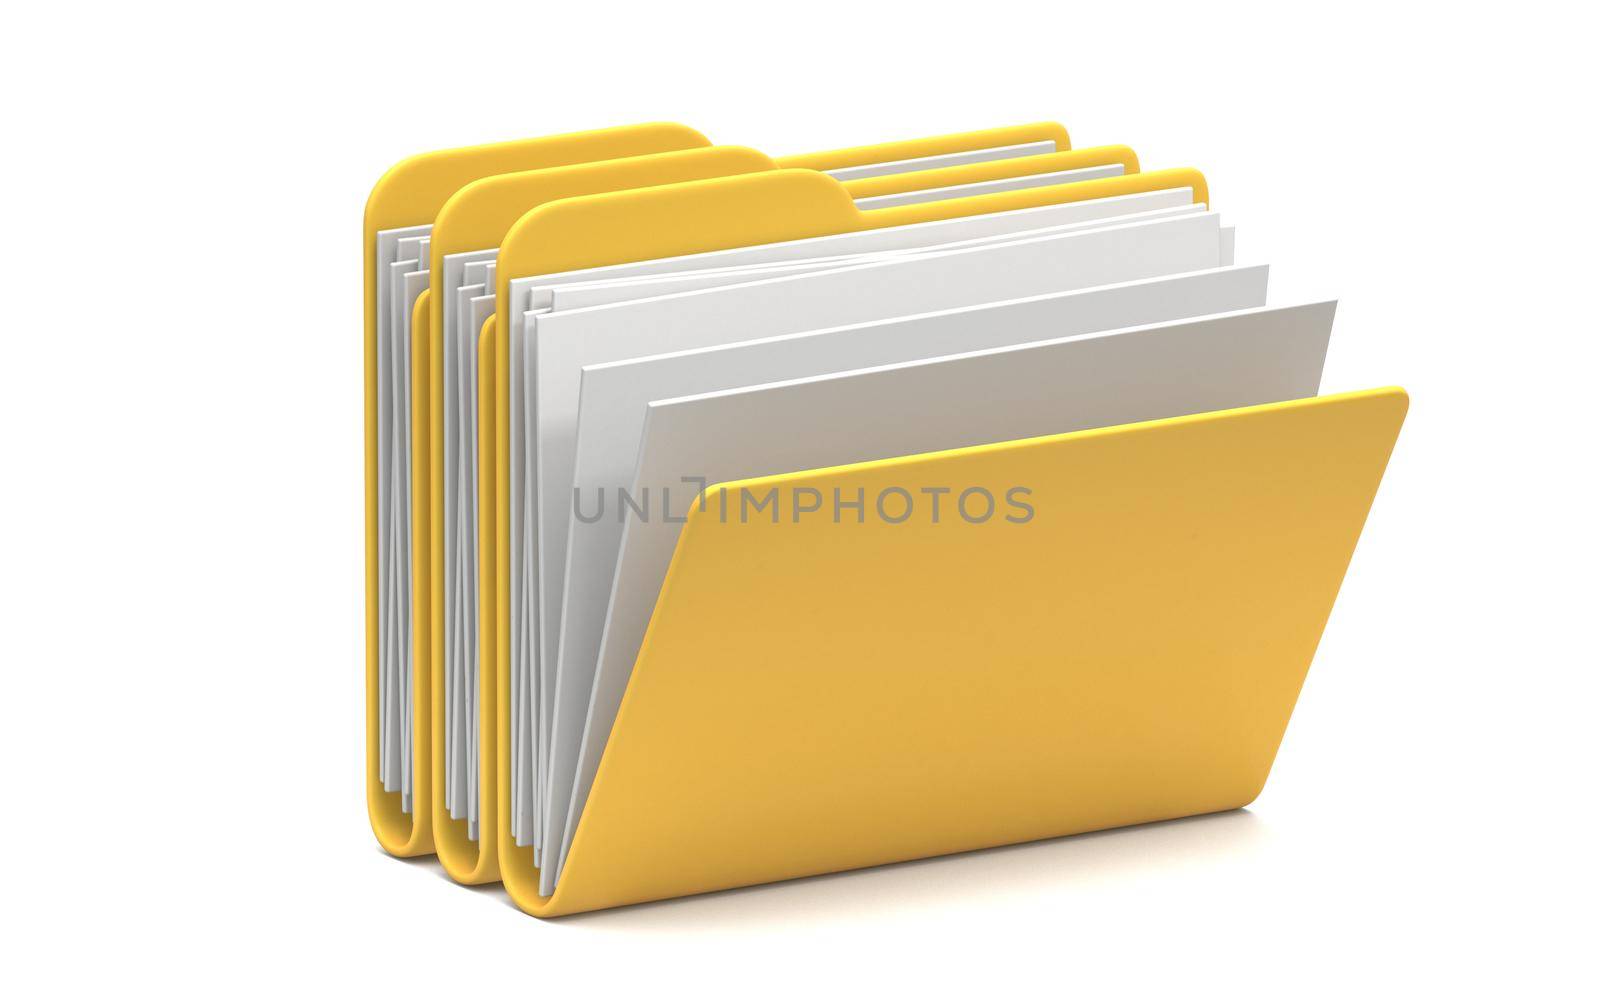 Three Yellow folders icon opened 3D rendering illustration isolated on white background